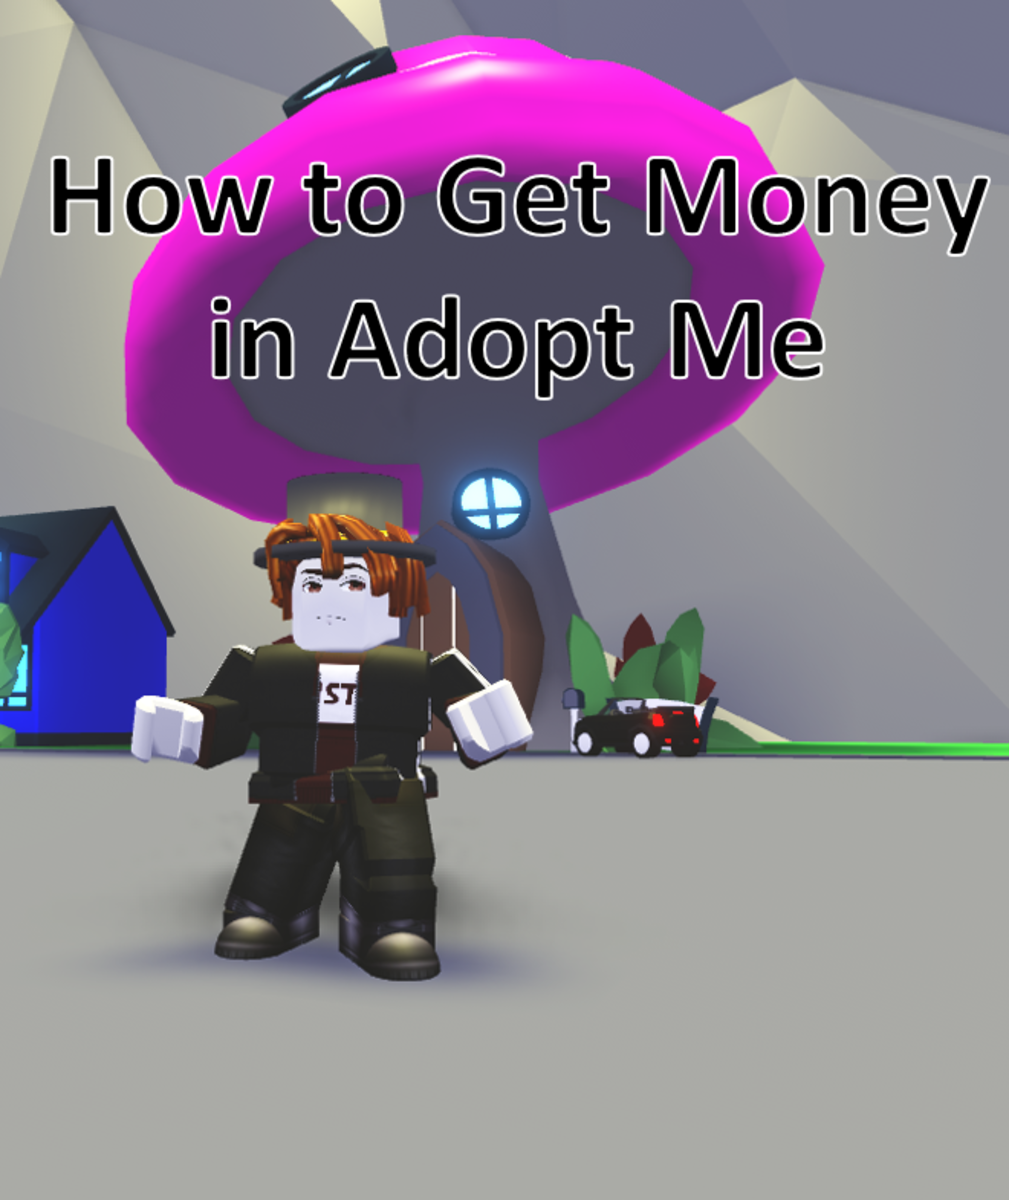 Read on to learn how to make more money in "Adopt Me!"